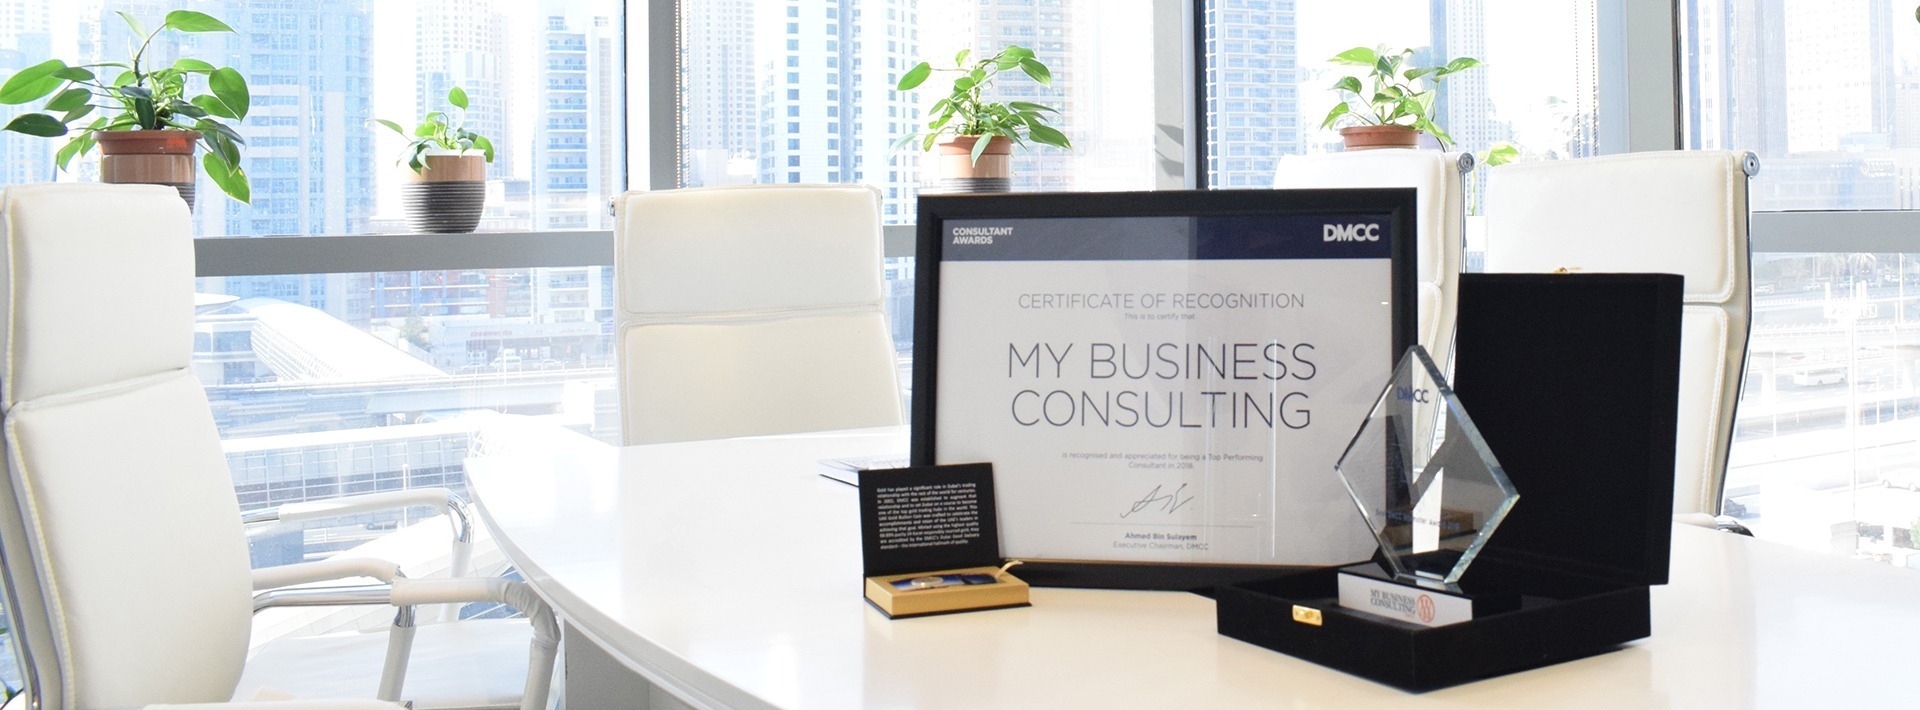 Best consultant award 2018 goes to My Business Consulting.